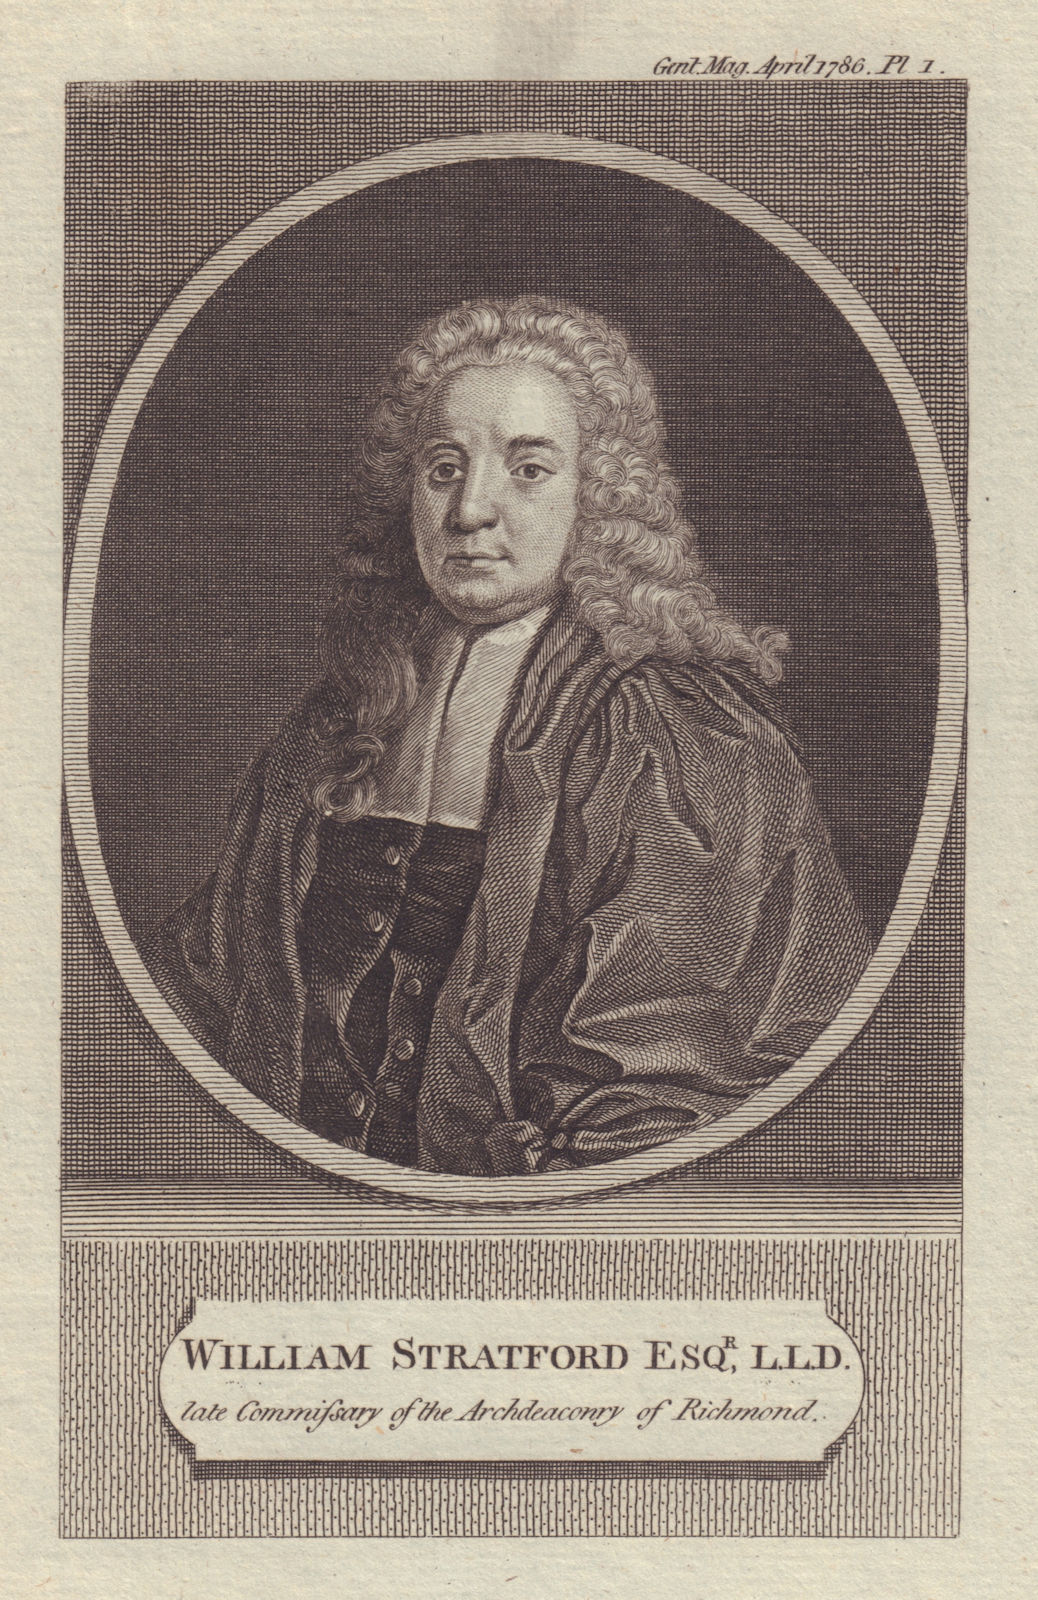 William Stratford, commissary of the Archdeaconry of Richmond. Yorkshire 1786